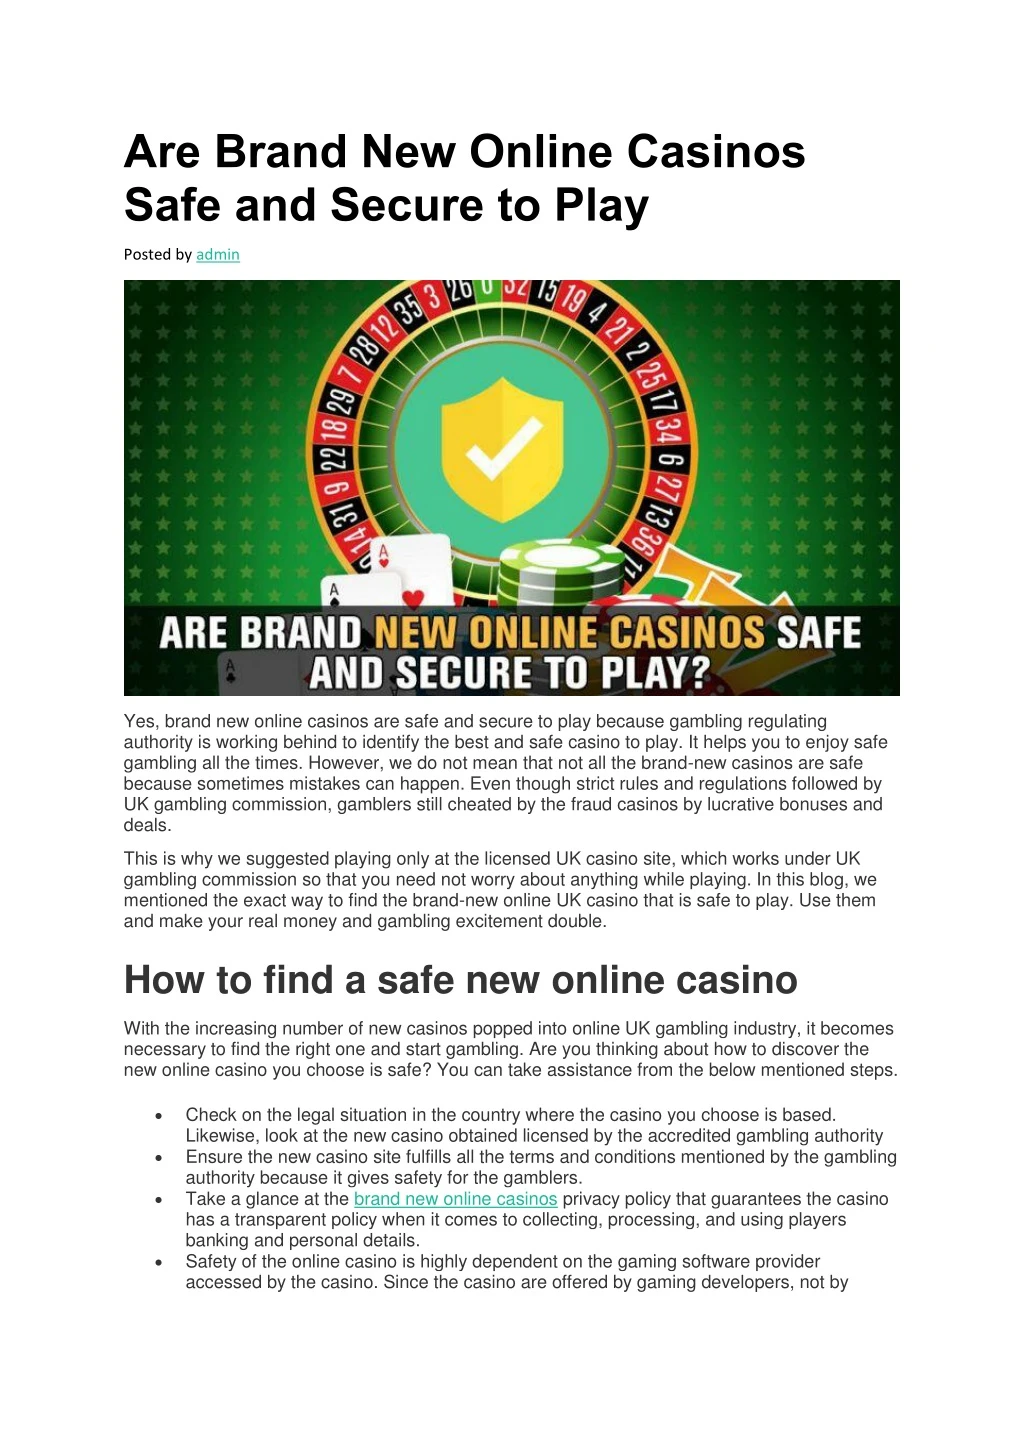 are brand new online casinos safe and secure